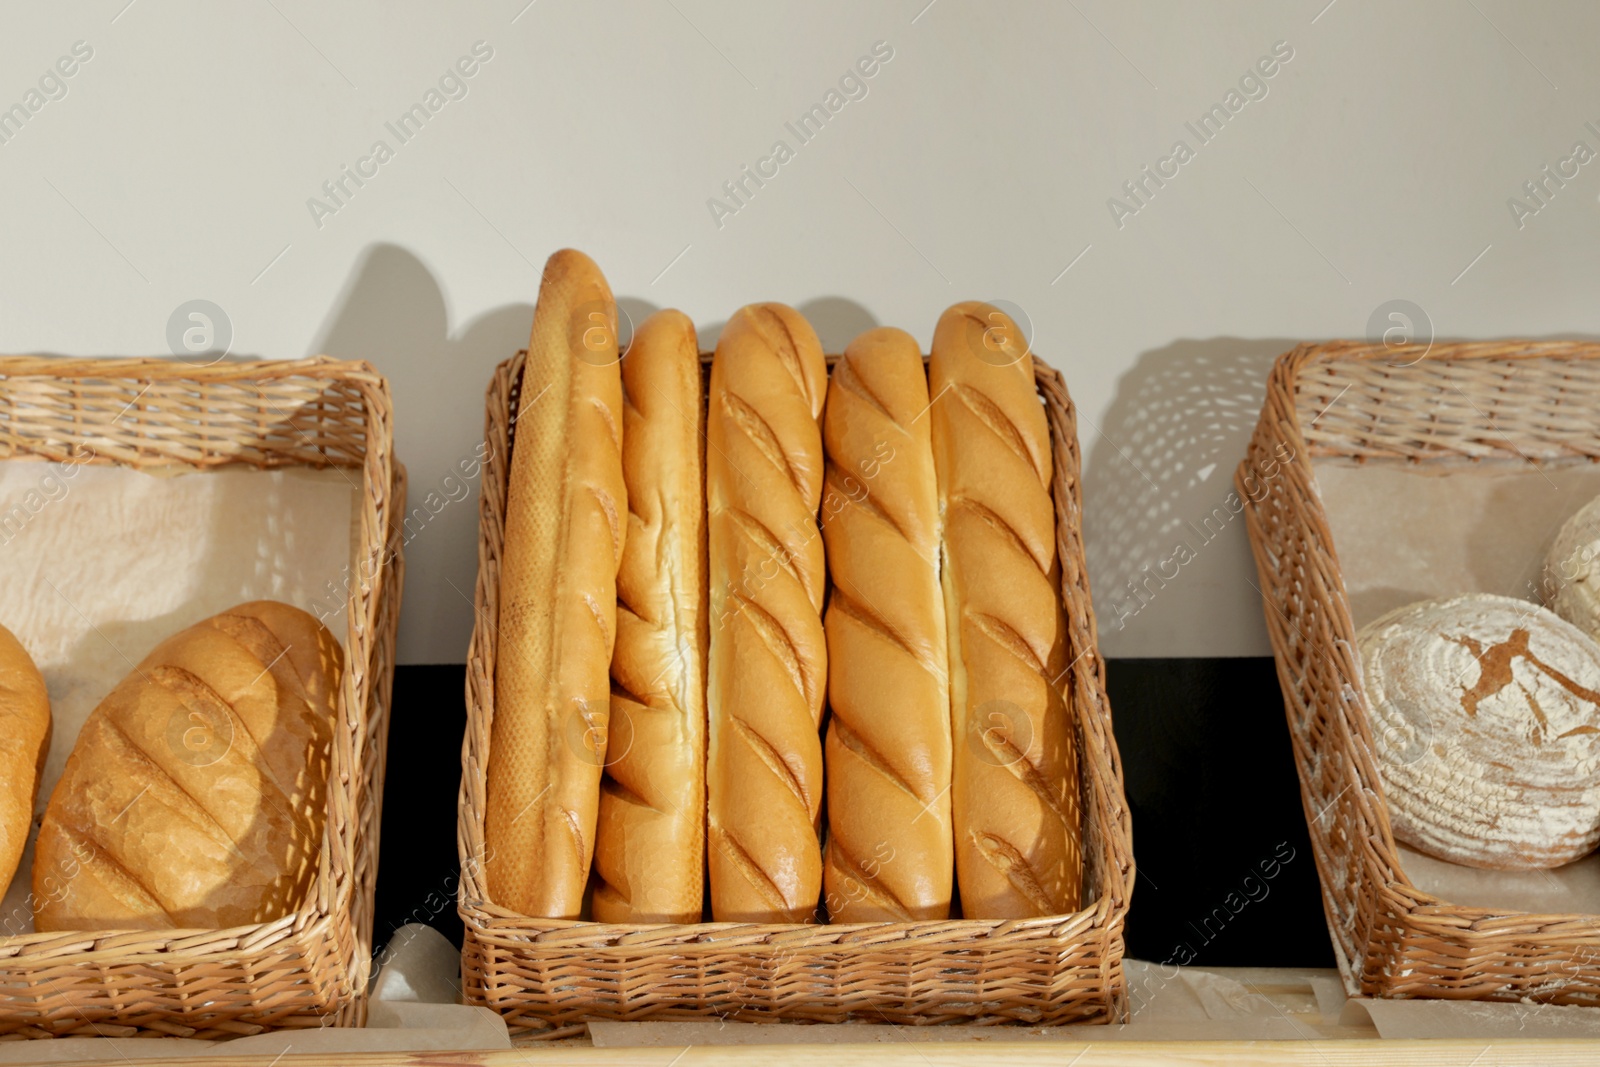 Photo of Trays with different breads on shelf in bakery